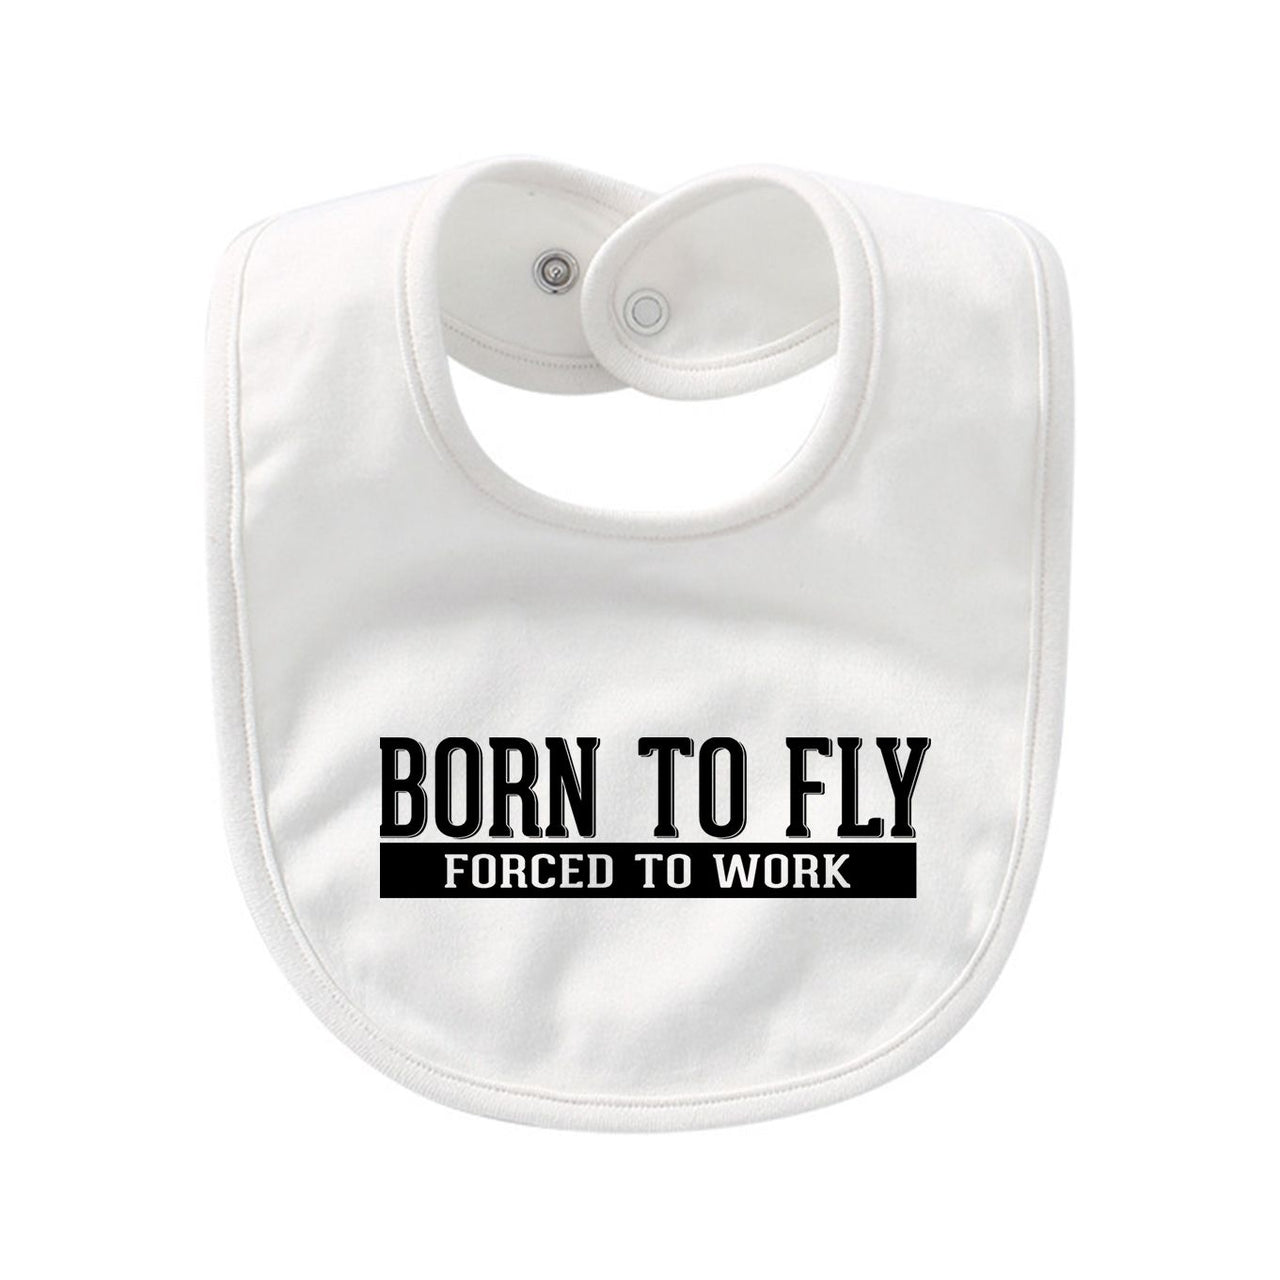 Born To Fly Forced To Work Designed Baby Saliva & Feeding Towels